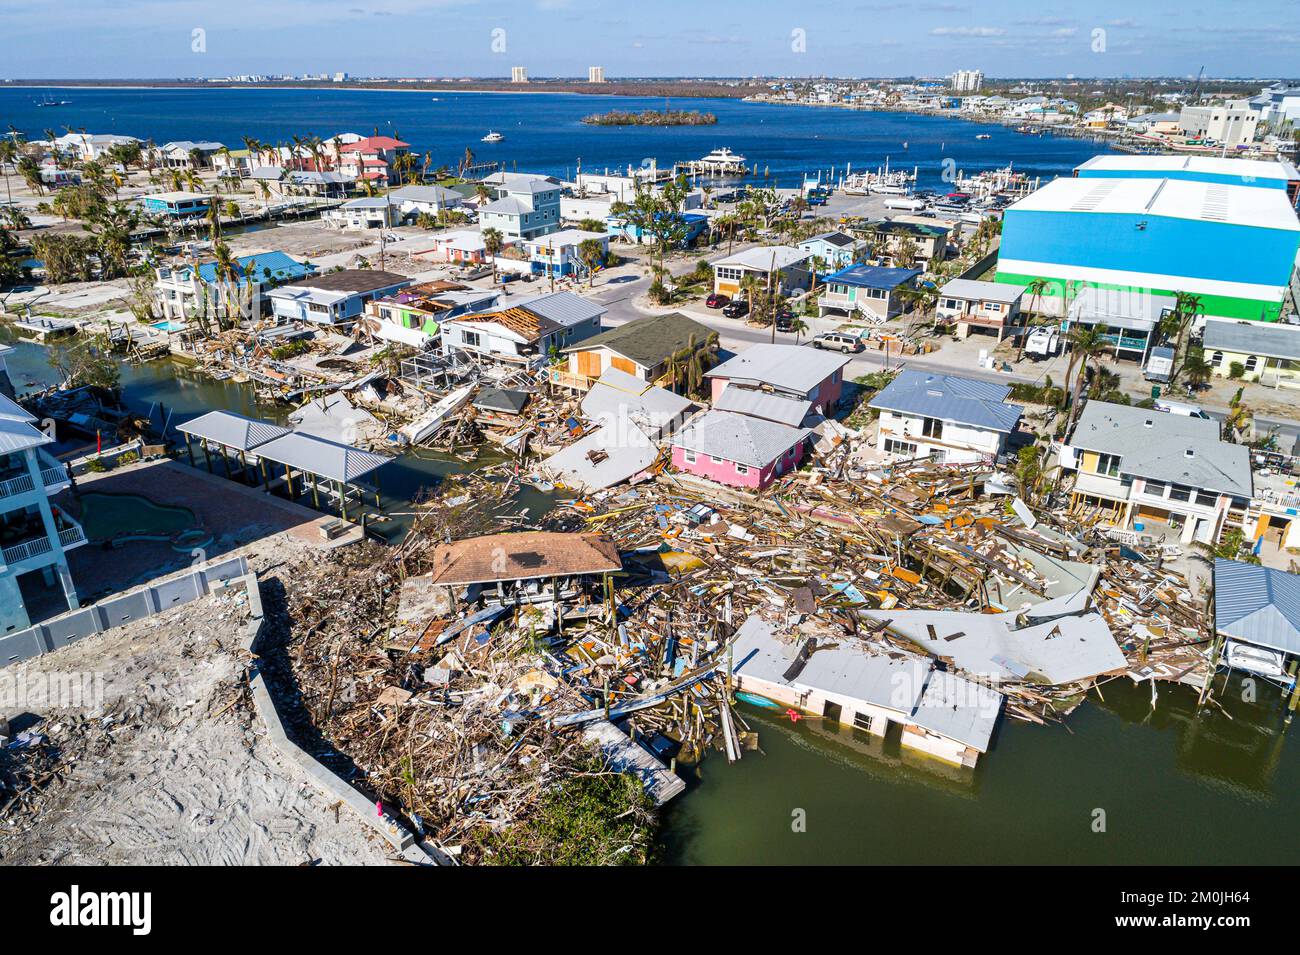 Fort Ft. Myers Beach Florida,Estero Island aerial overhead view from above,houses homes cottages property Hurricane Ian damage damaged destruction des Stock Photo